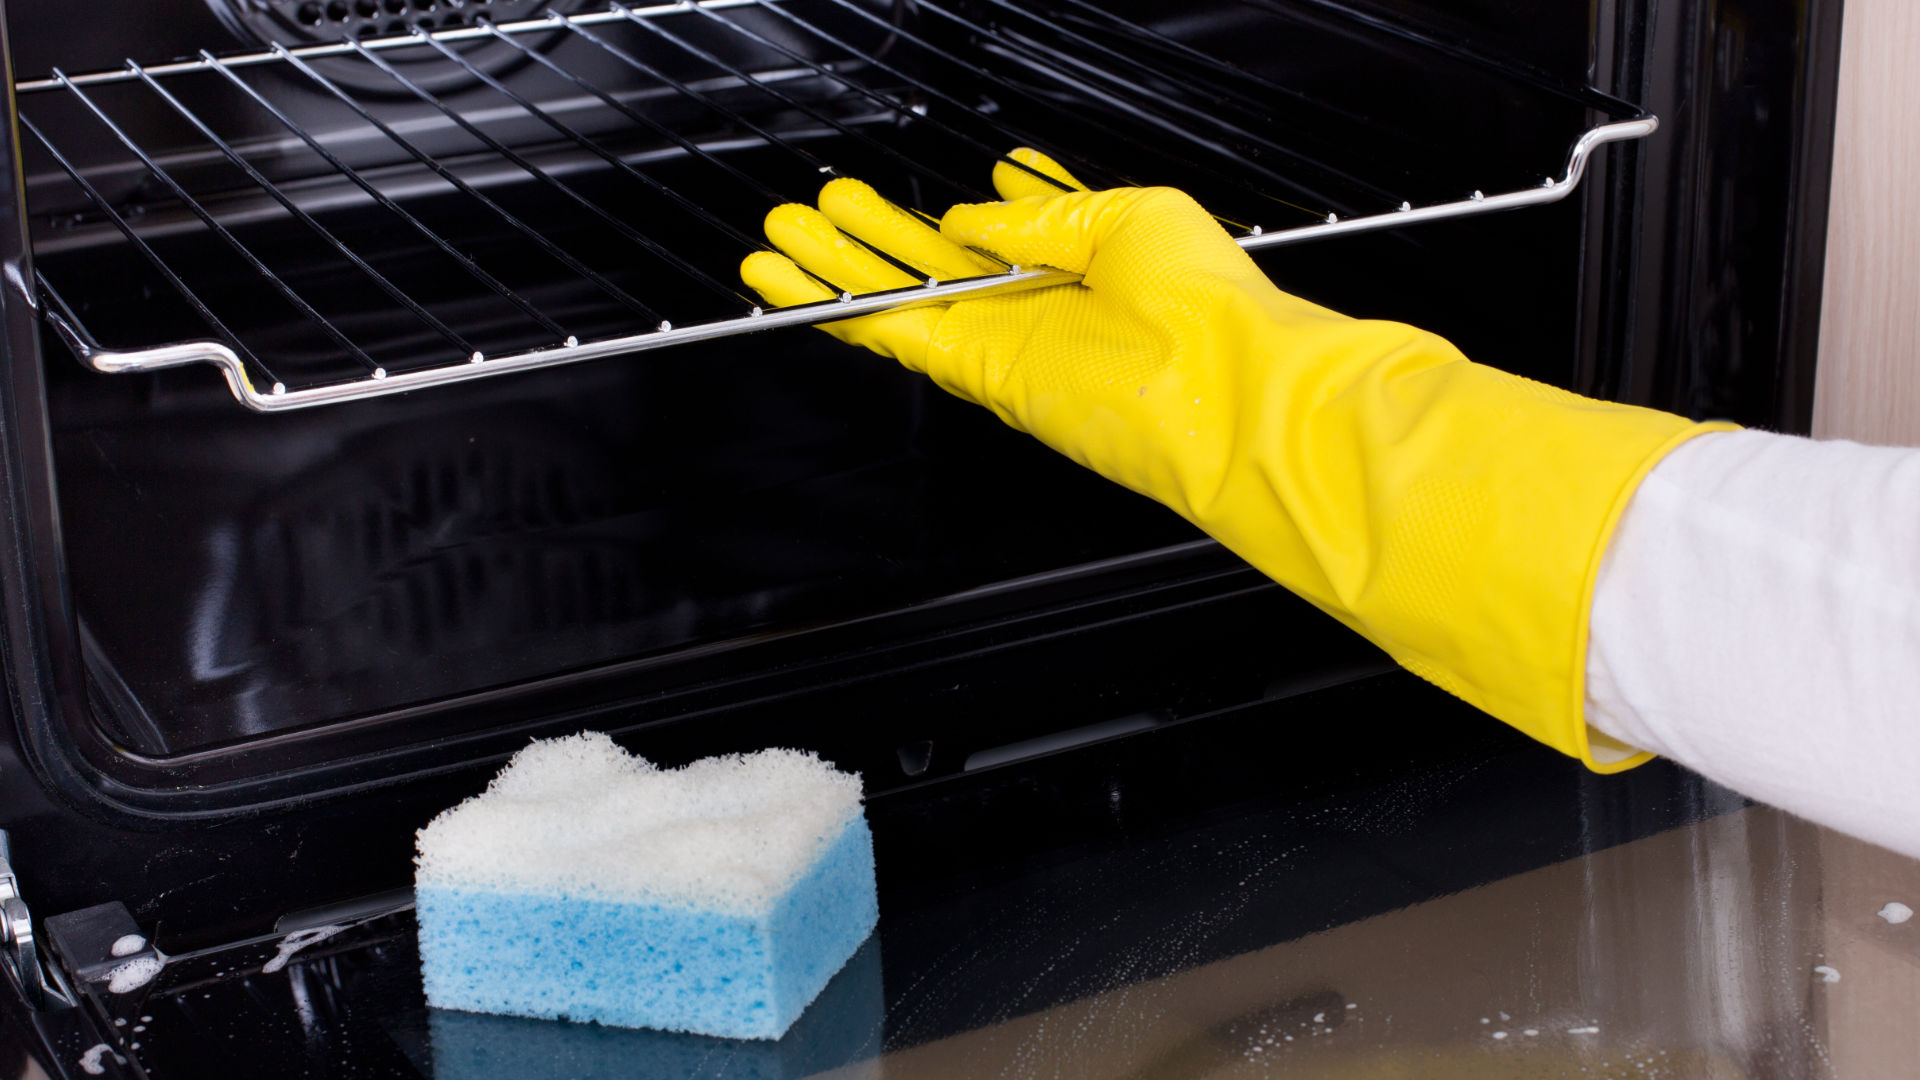 Can Self-Cleaning Oven Kill You? Debunking the Oven Myth